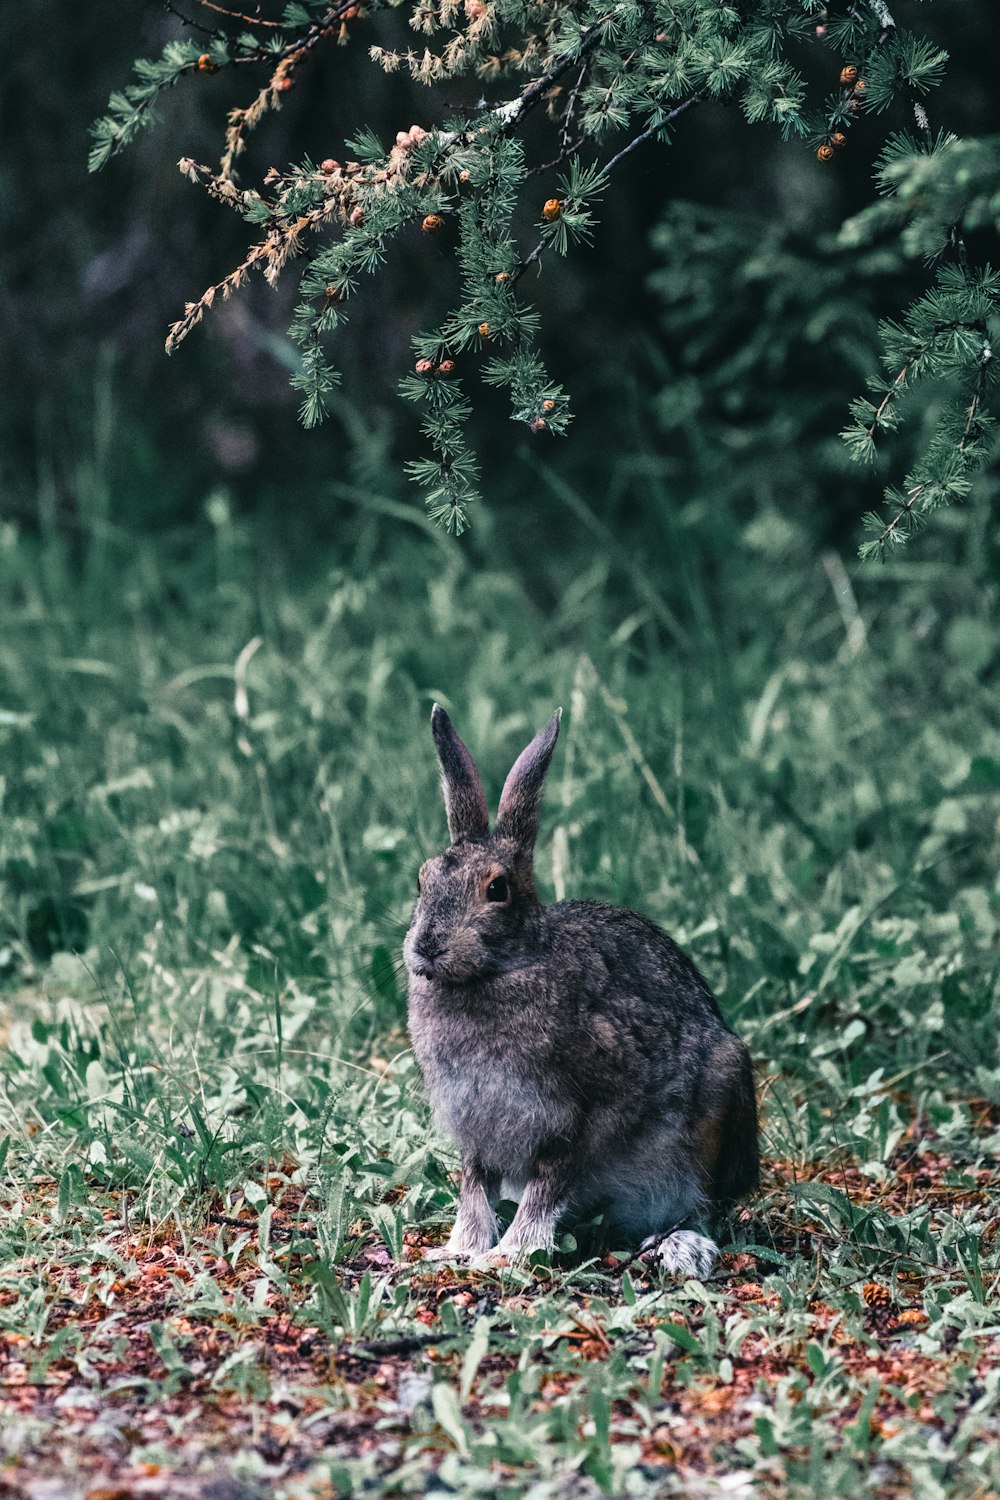 a rabbit sitting in the grass near a tree